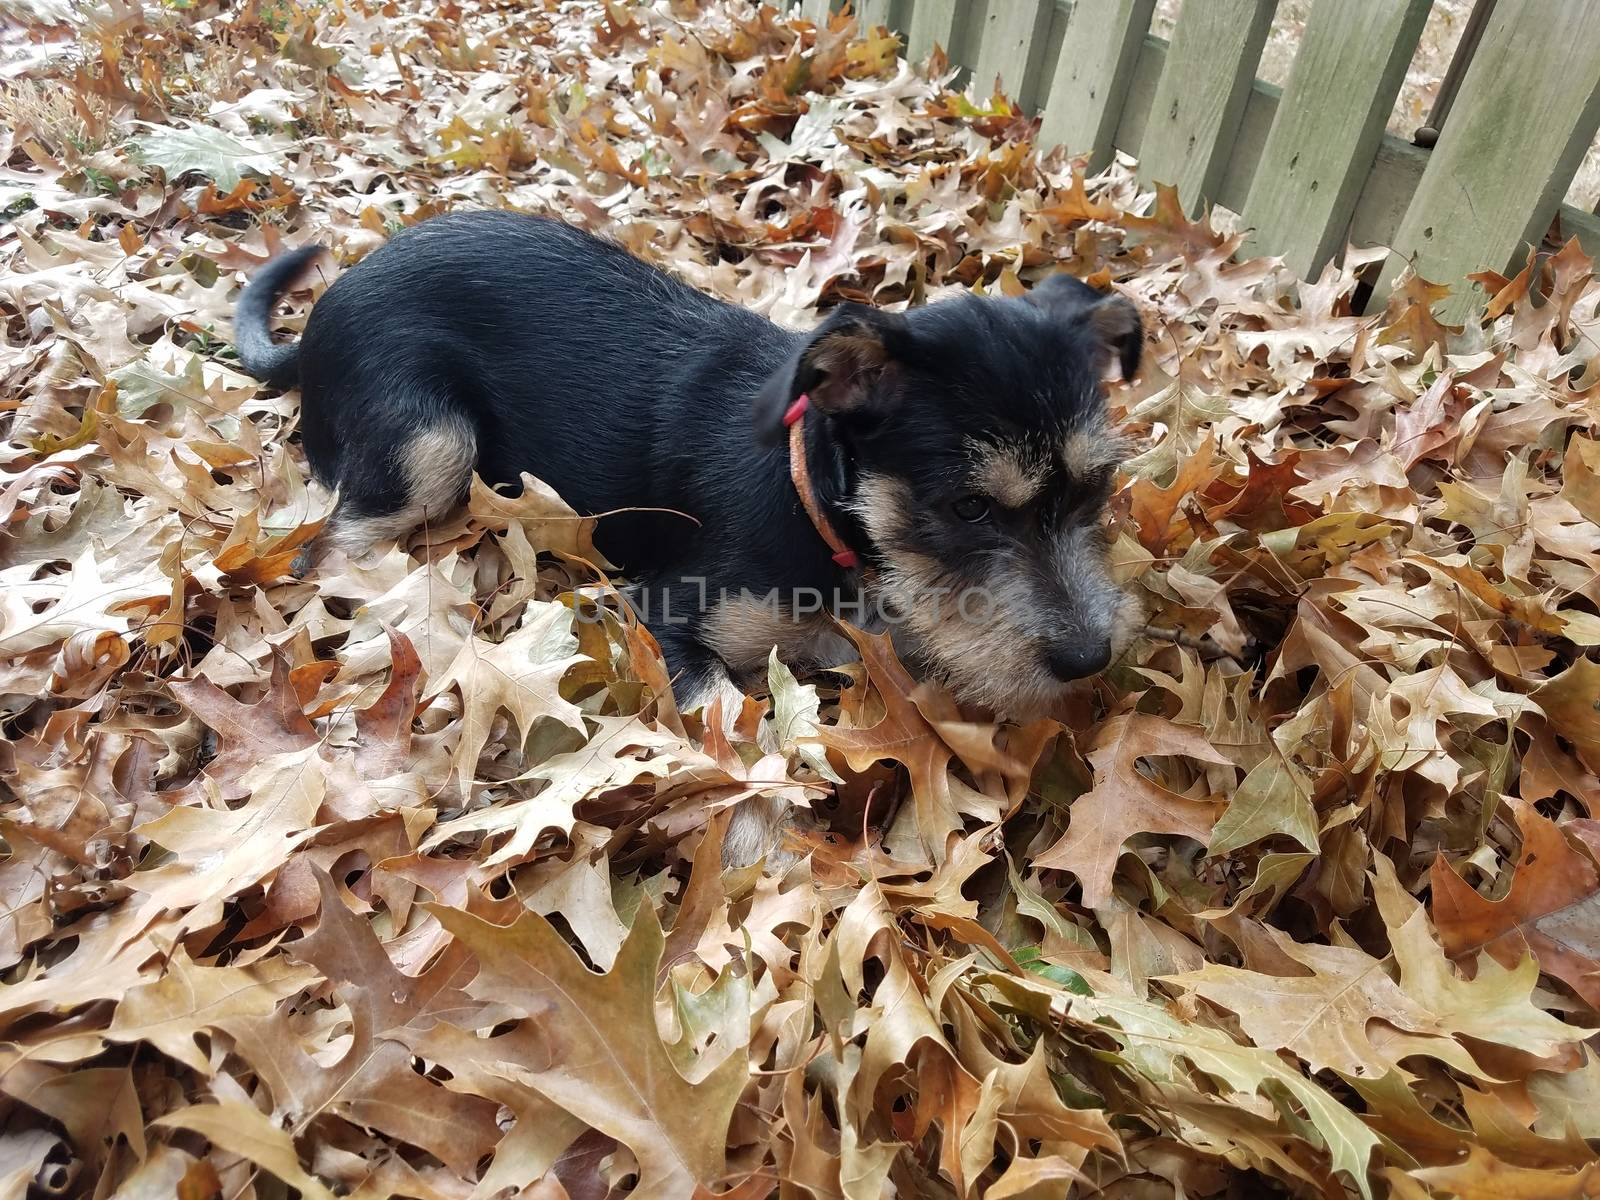 black and white puppy playing in fallen brown leaves by stockphotofan1